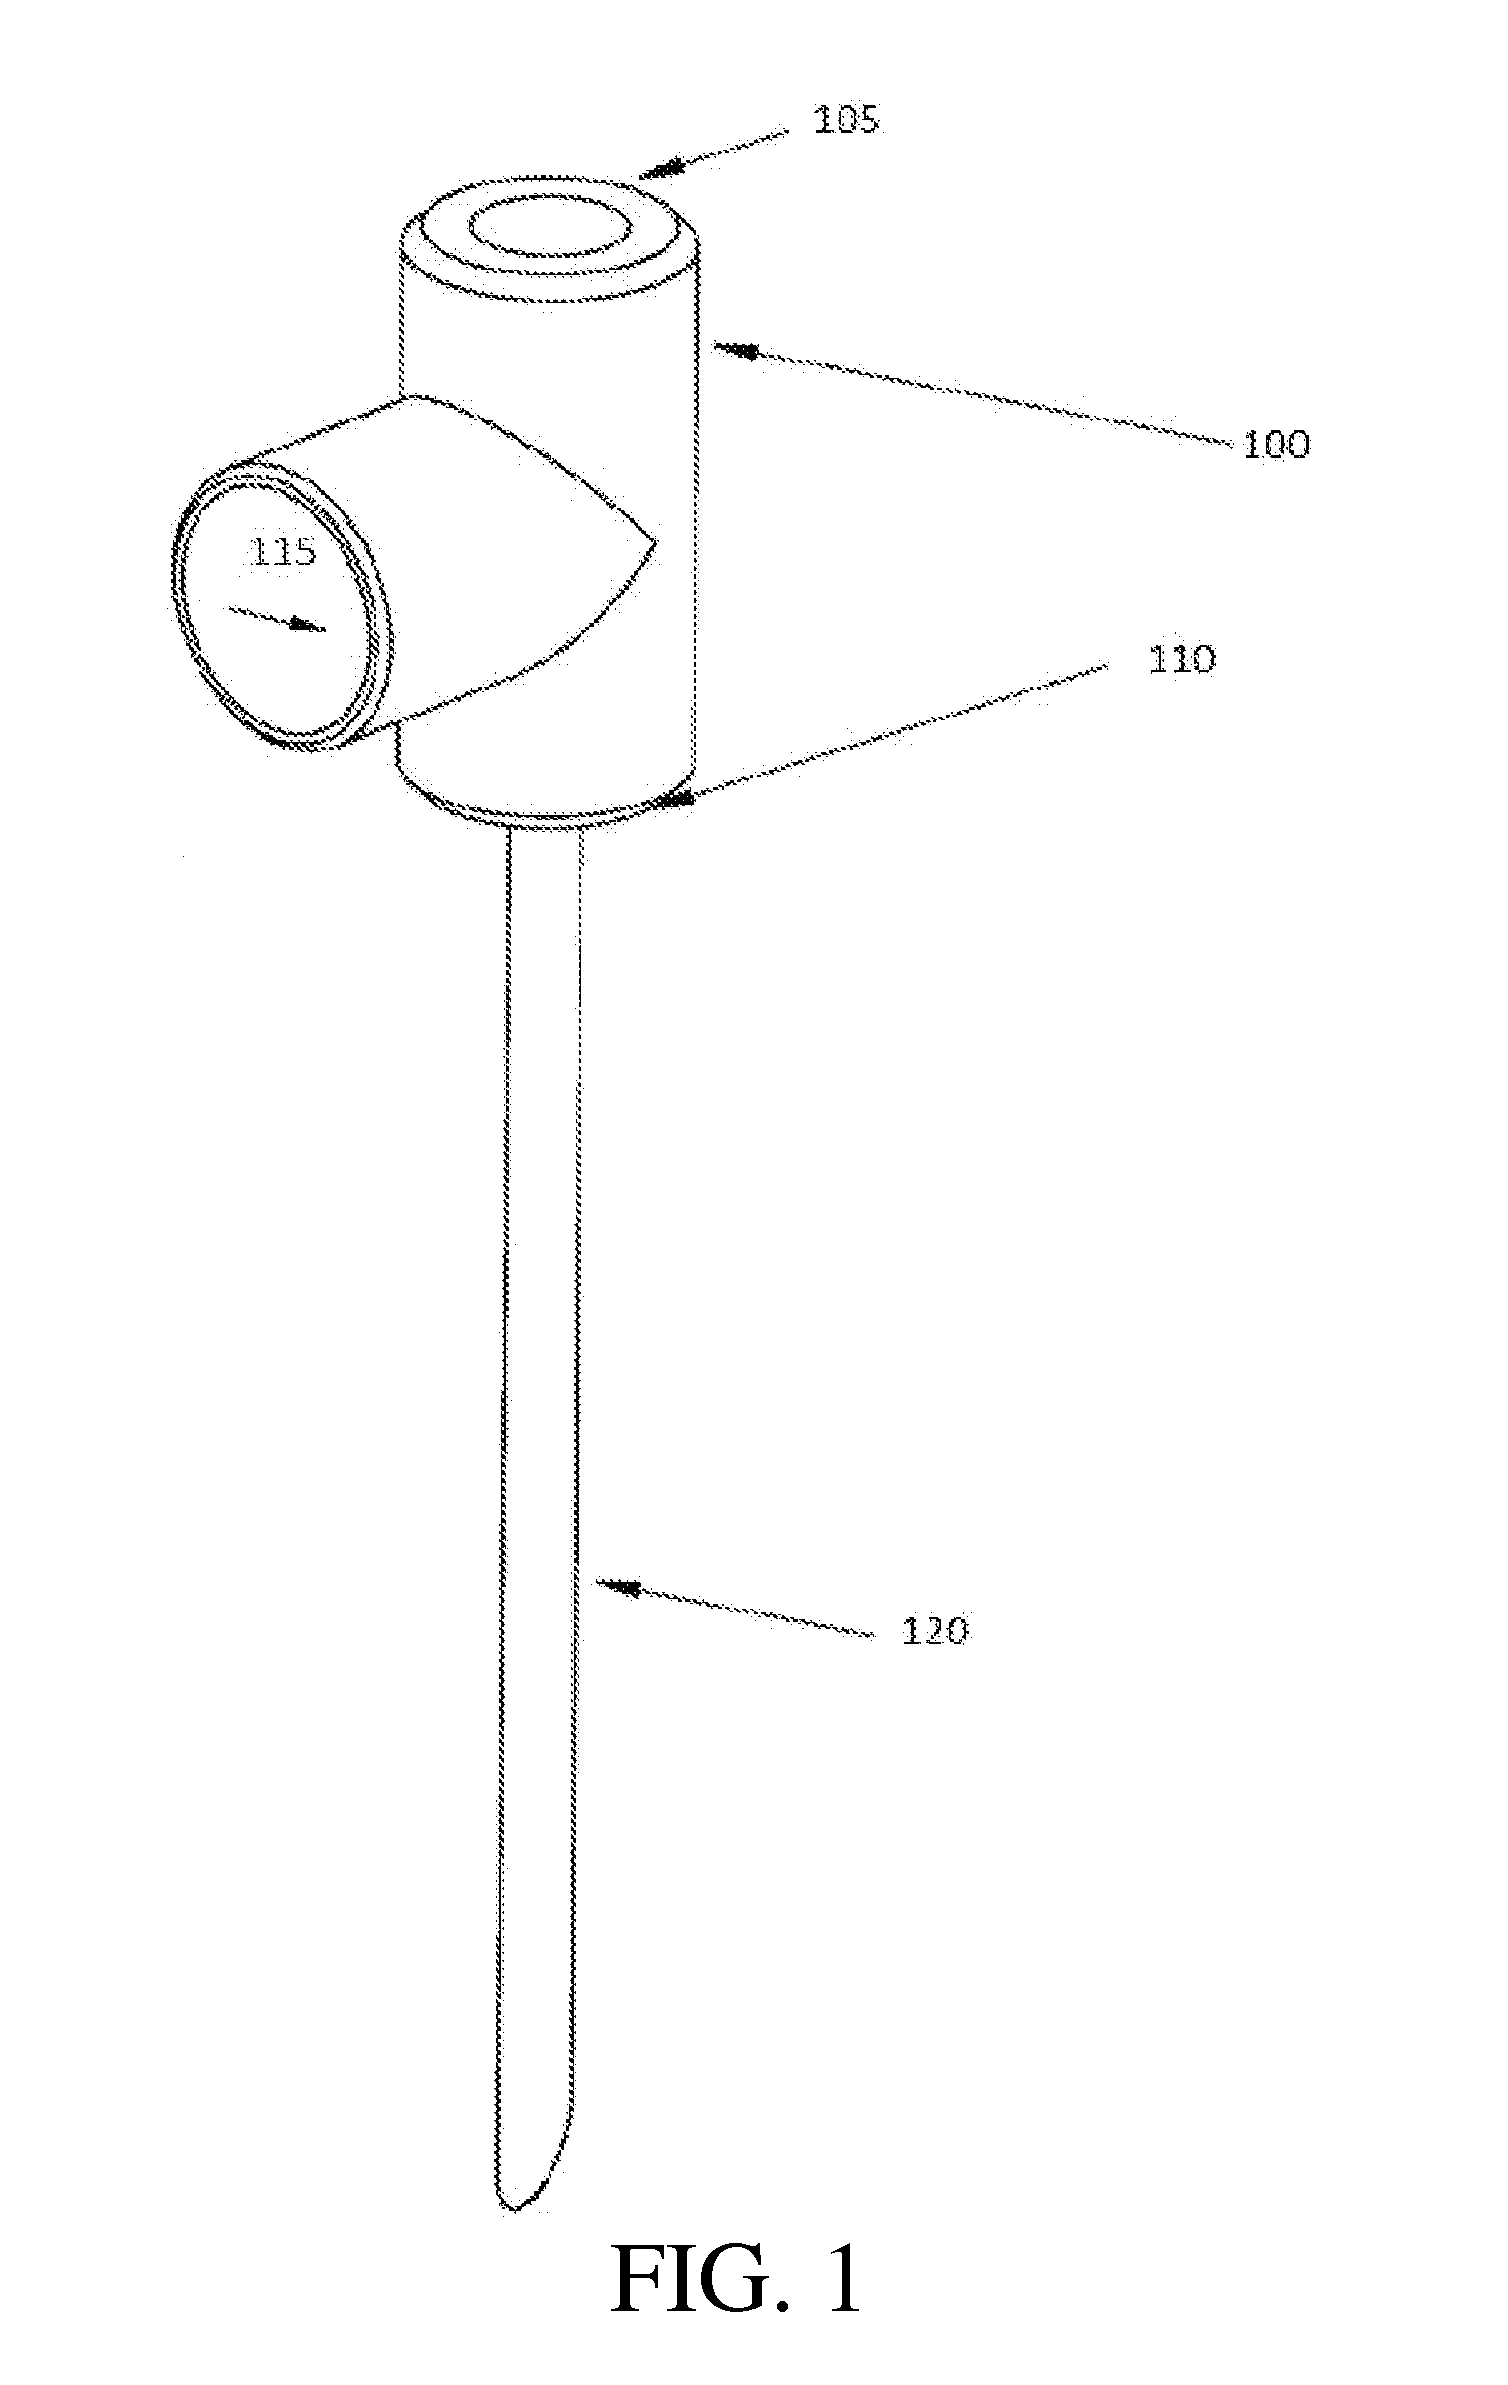 System and Method for Concerted Operation of Biopsies and Other Medical Tasks